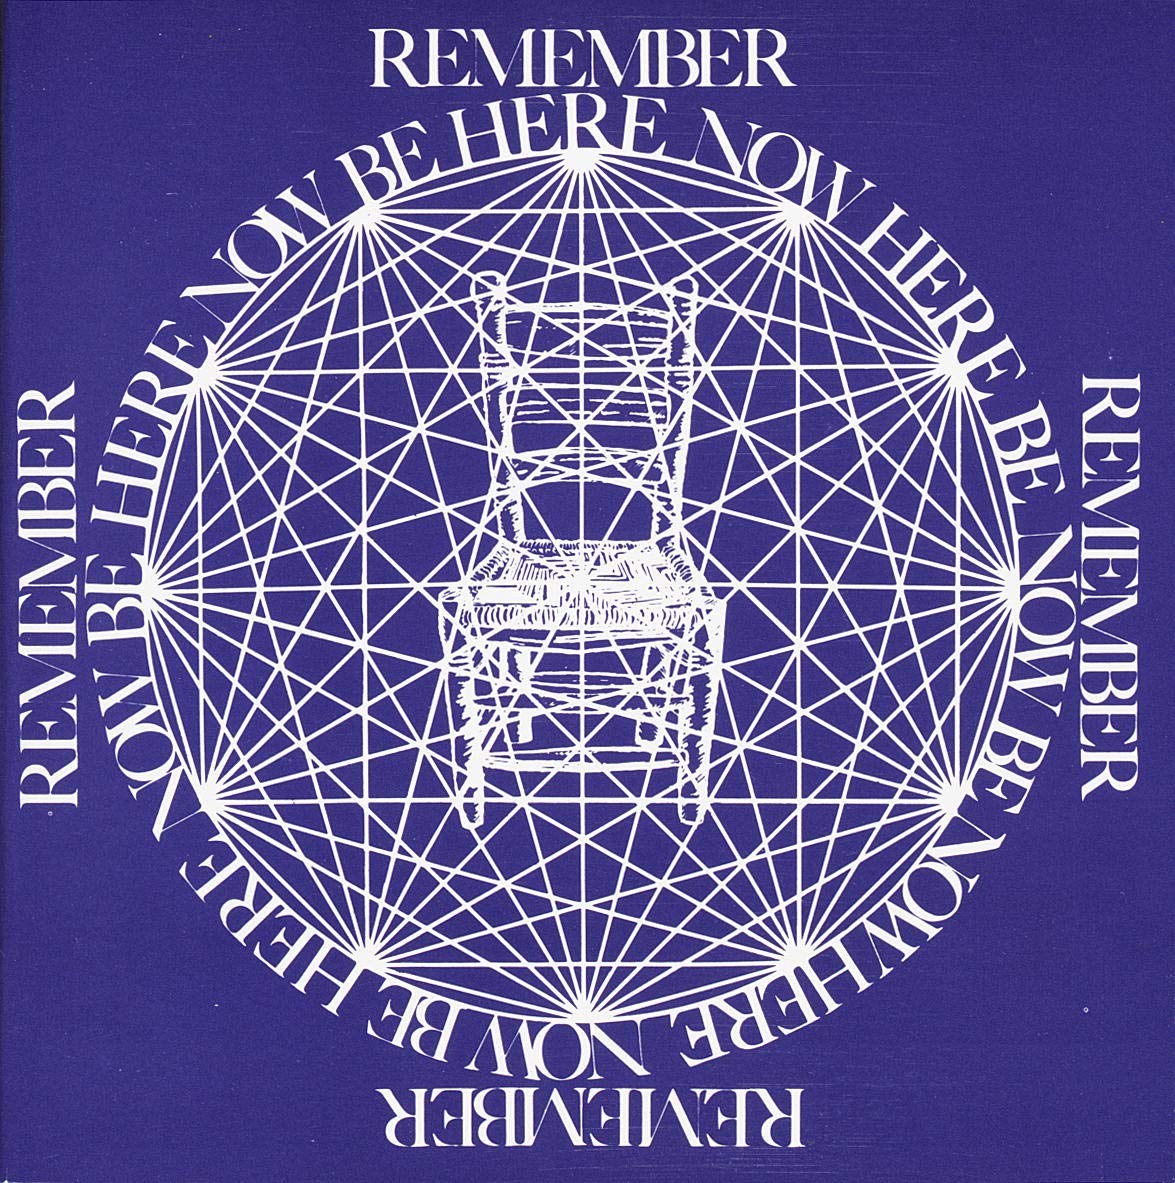 Ram Dass: Be Here Now (1971, Lama Foundation, San Cristobal, New Mexico)